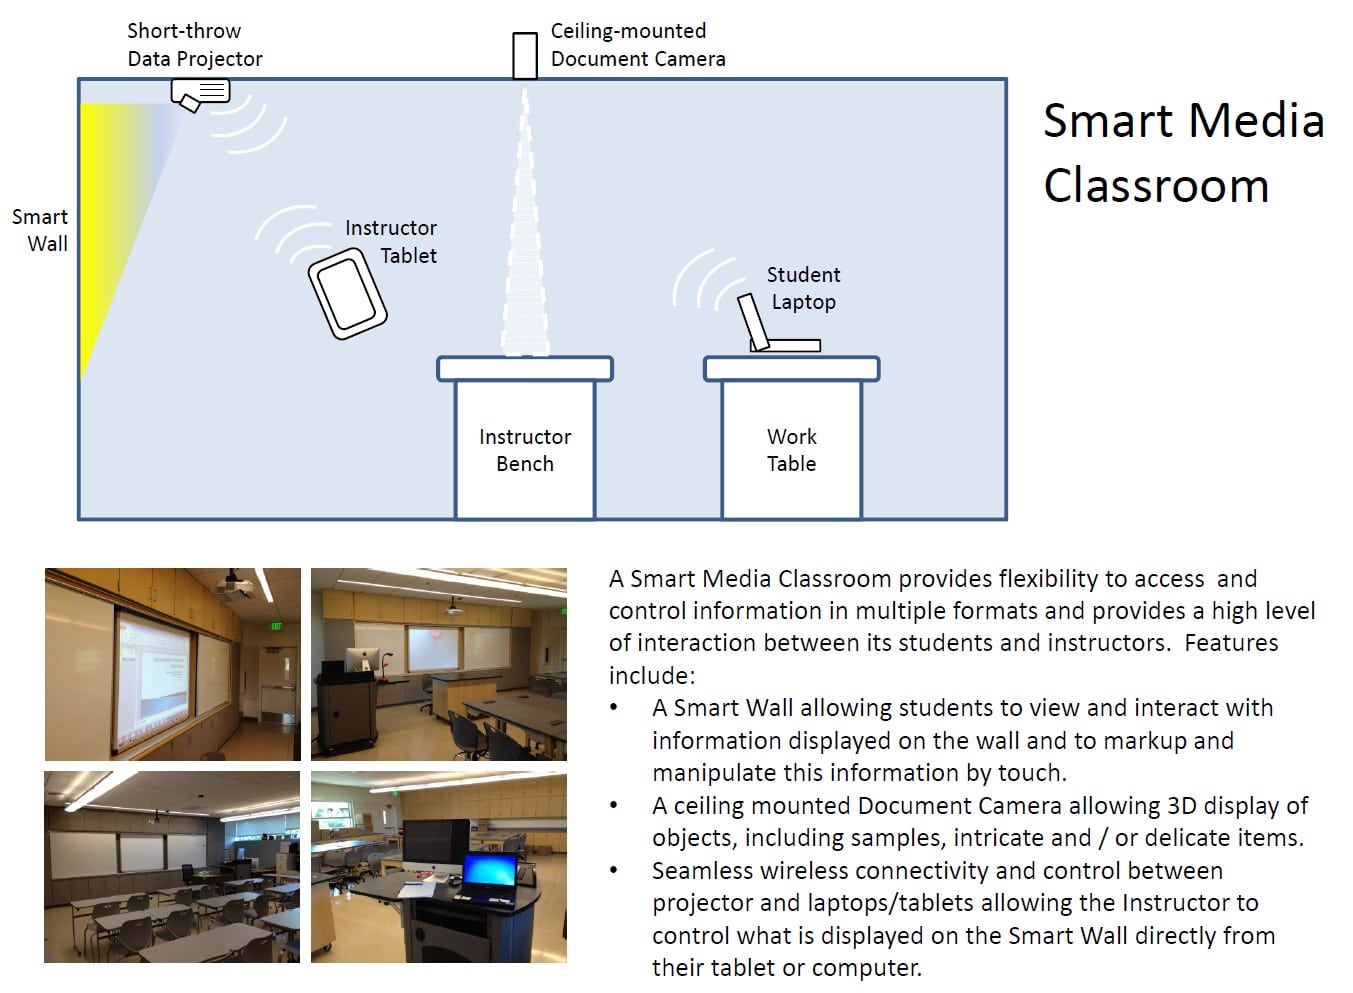 Latest and Greatest in K12 Technology - Smart Media Classroom